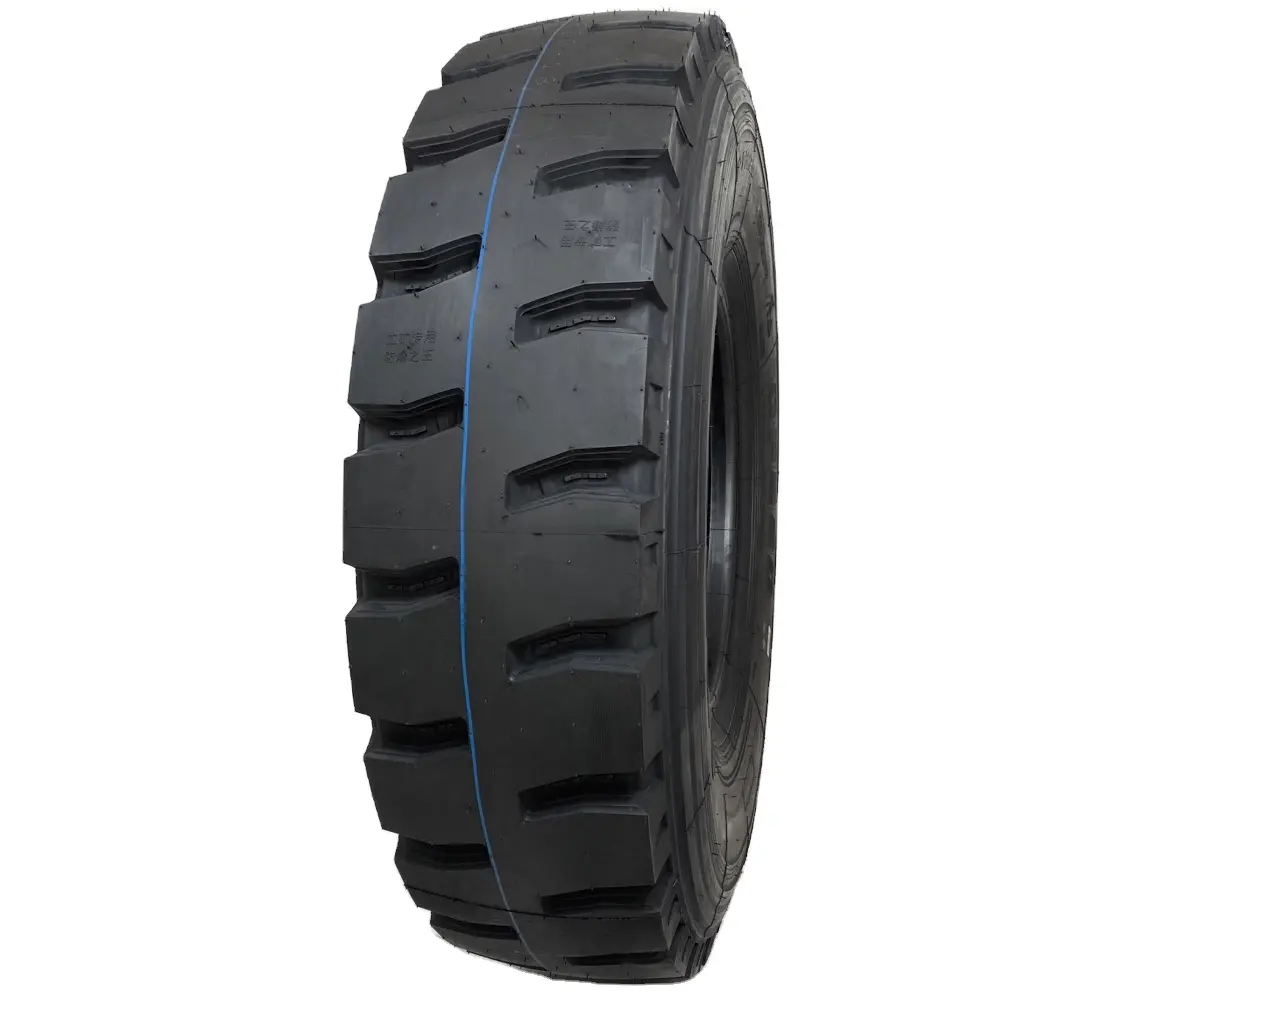 Tyres / Tires for truck and bus 1200R20 Maxxis quality